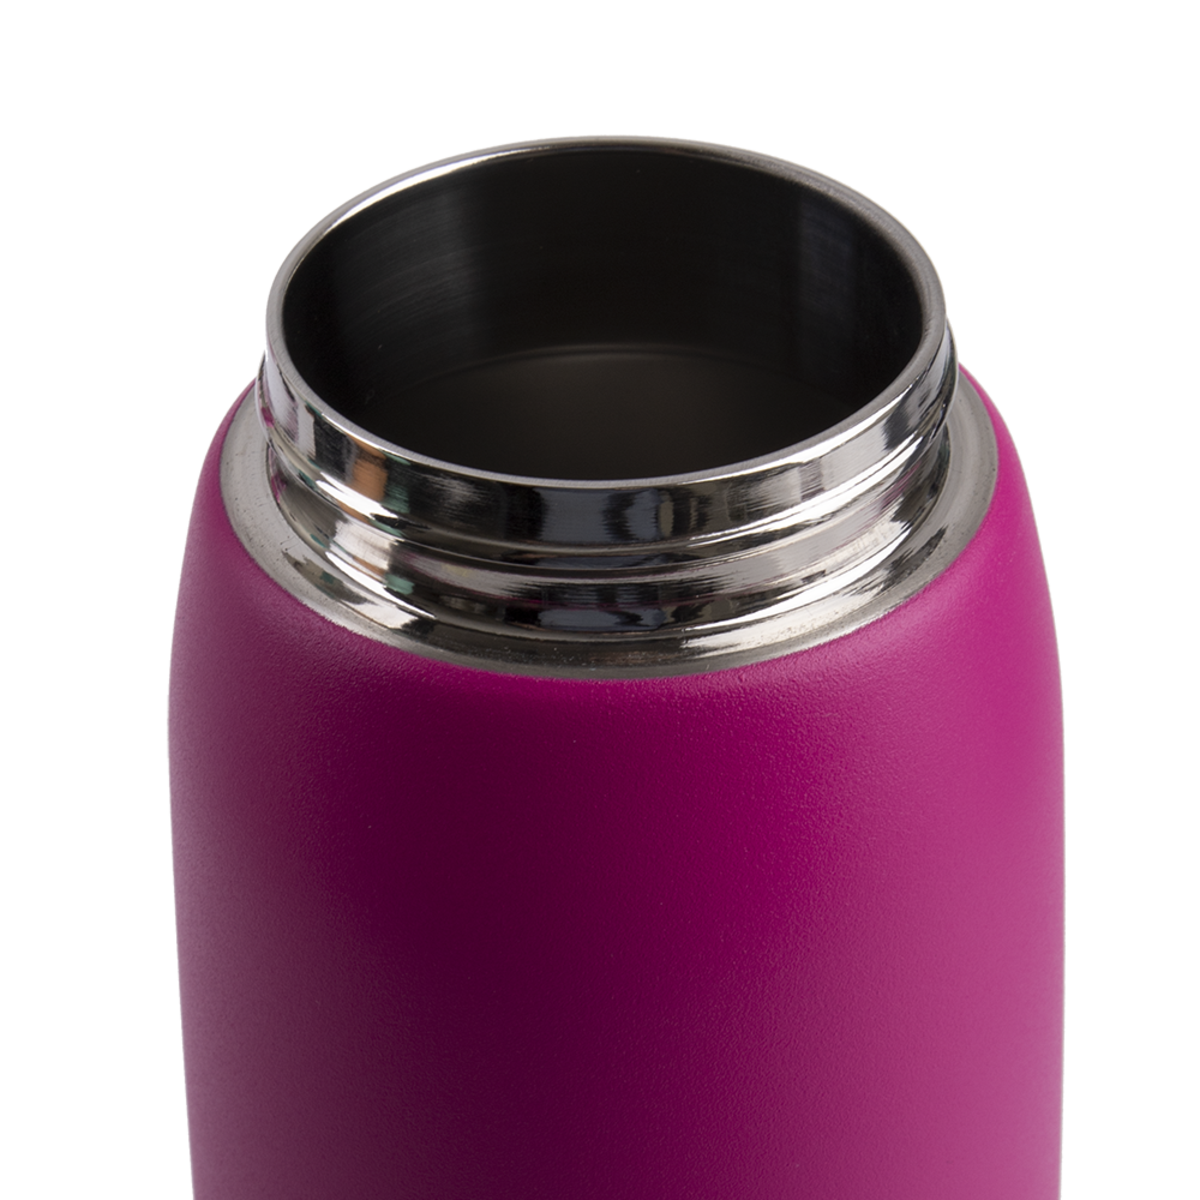 oasis stainless steel double wall insulated sports bottle w/ screw cap 780ml - fuchsia